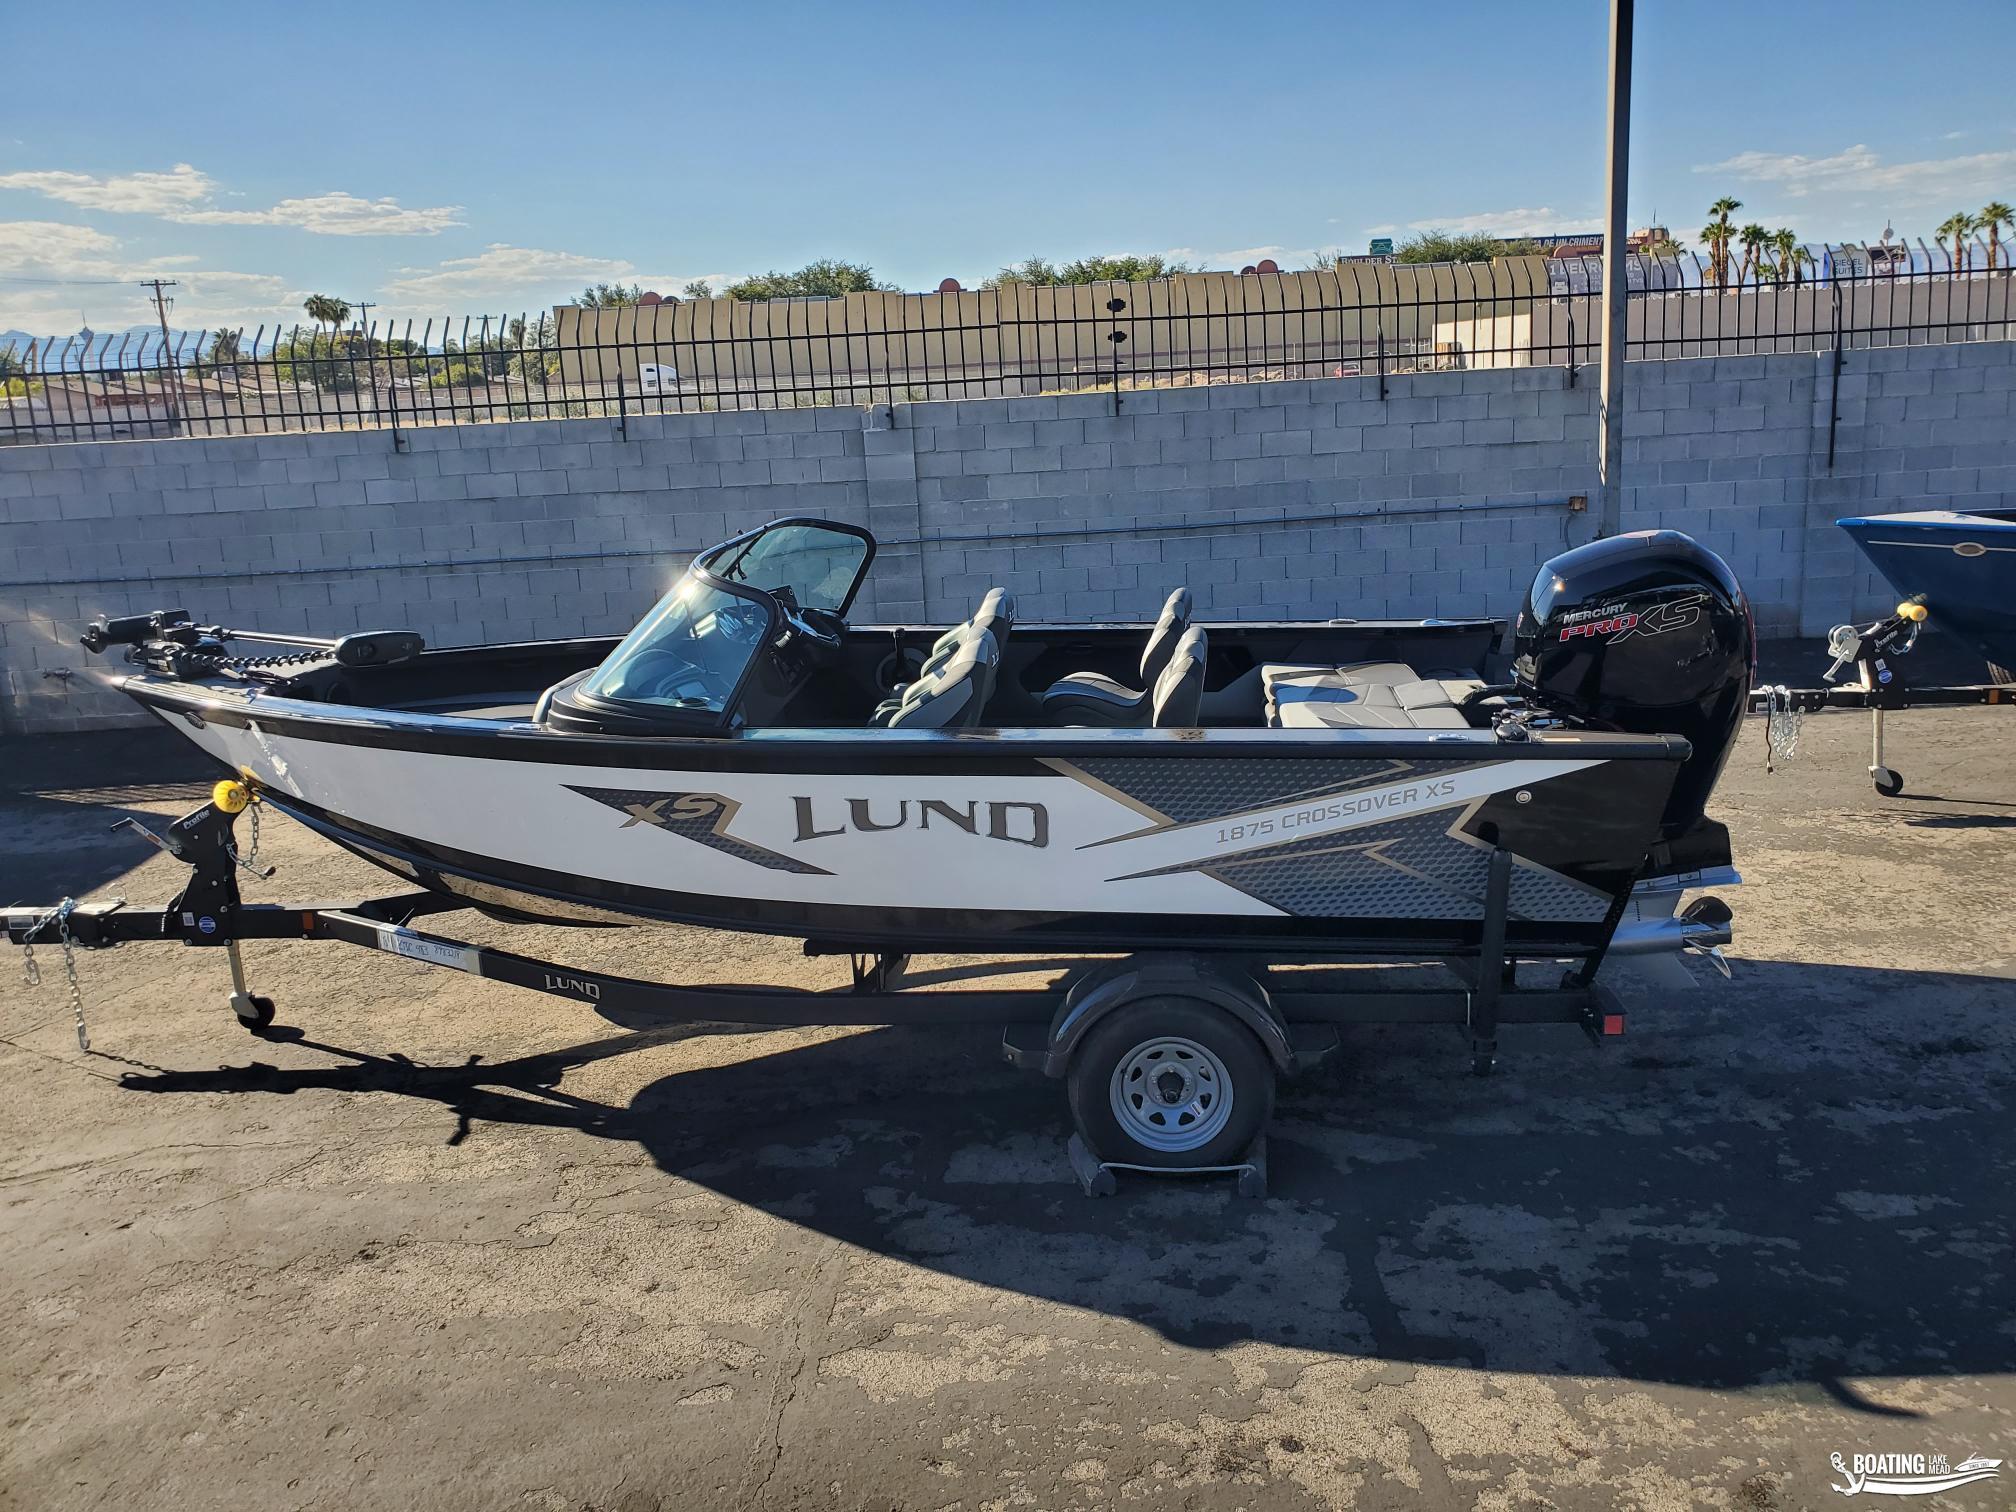 New 2022 Lund 1875 Crossover XS, 89121 Las Vegas - Boat Trader